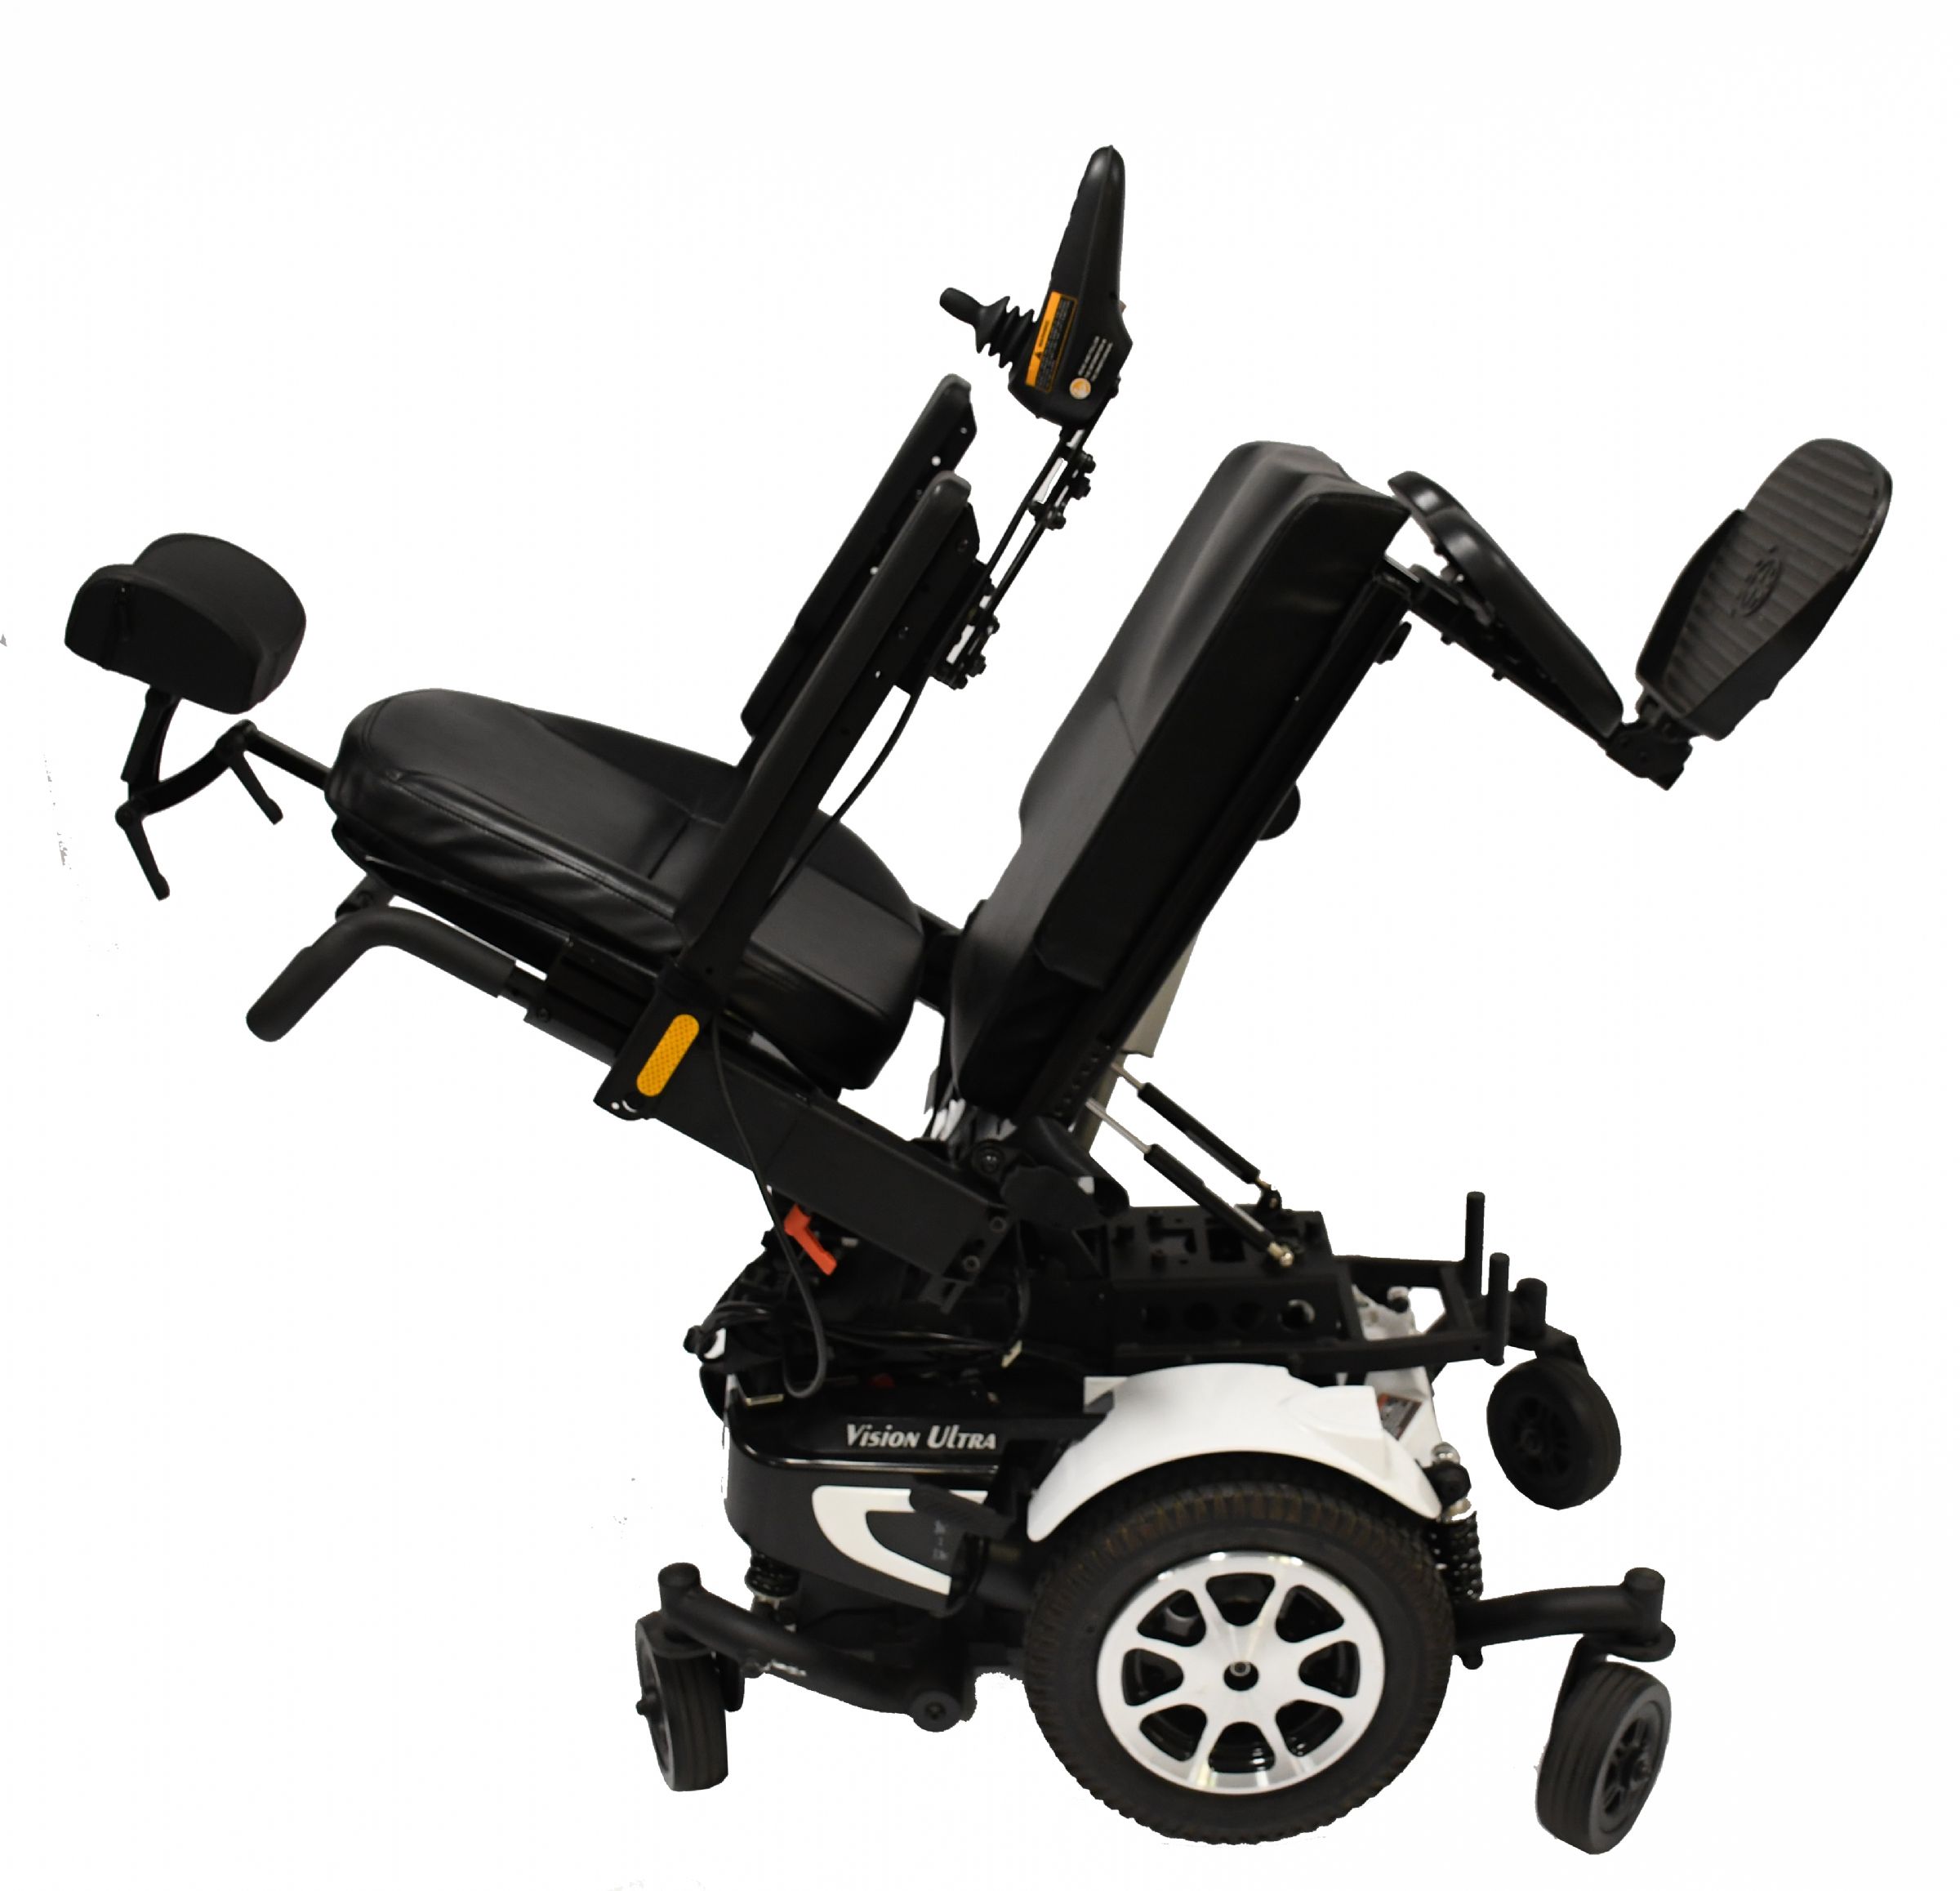 Vision Ultra Electric Power Wheelchair by Merits